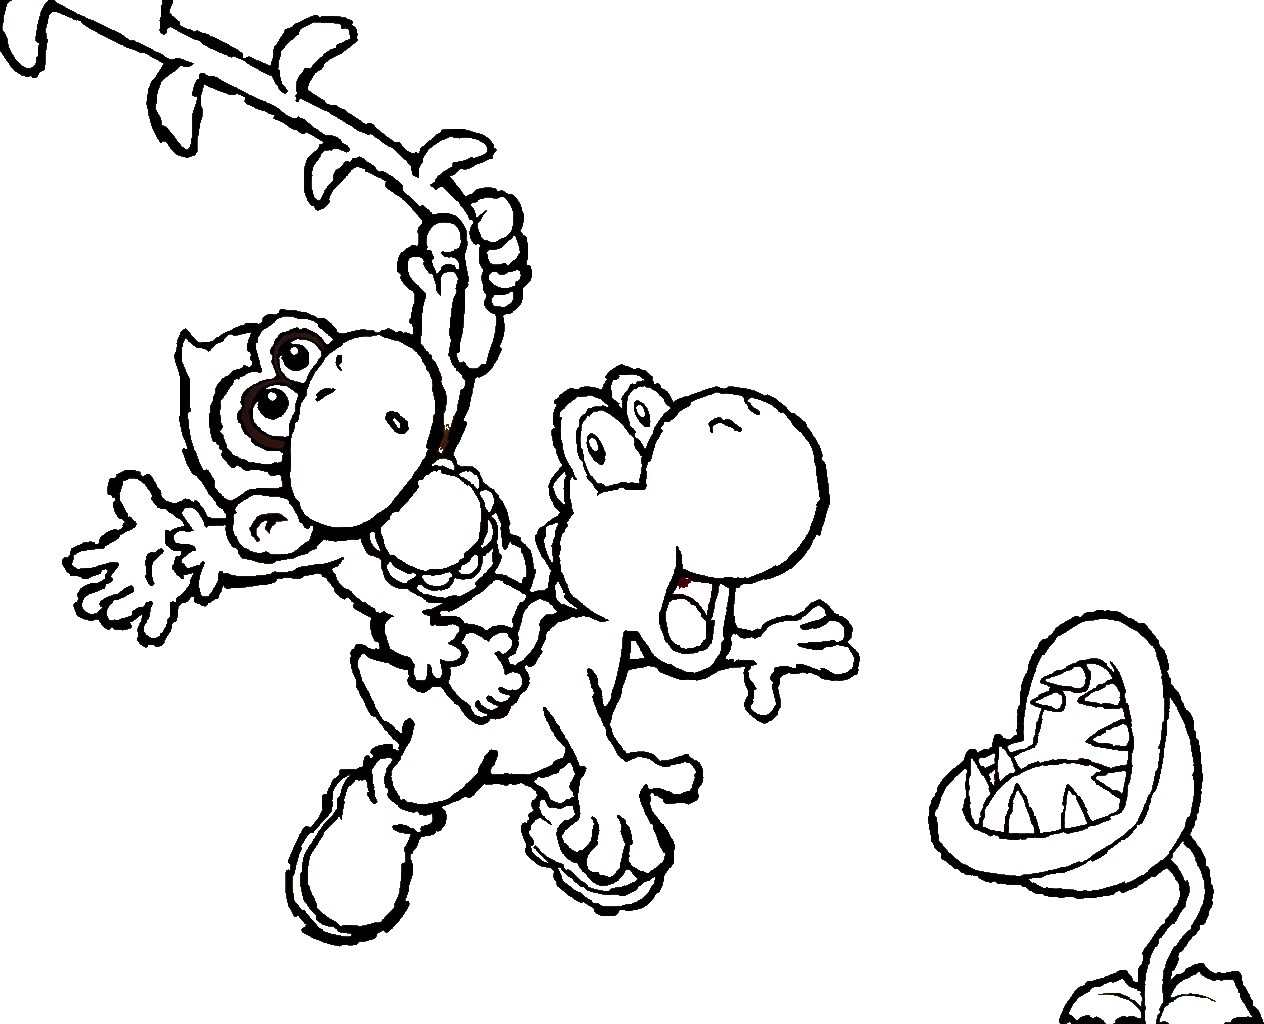 Coloring page: Yoshi (Video Games) #113527 - Printable coloring pages